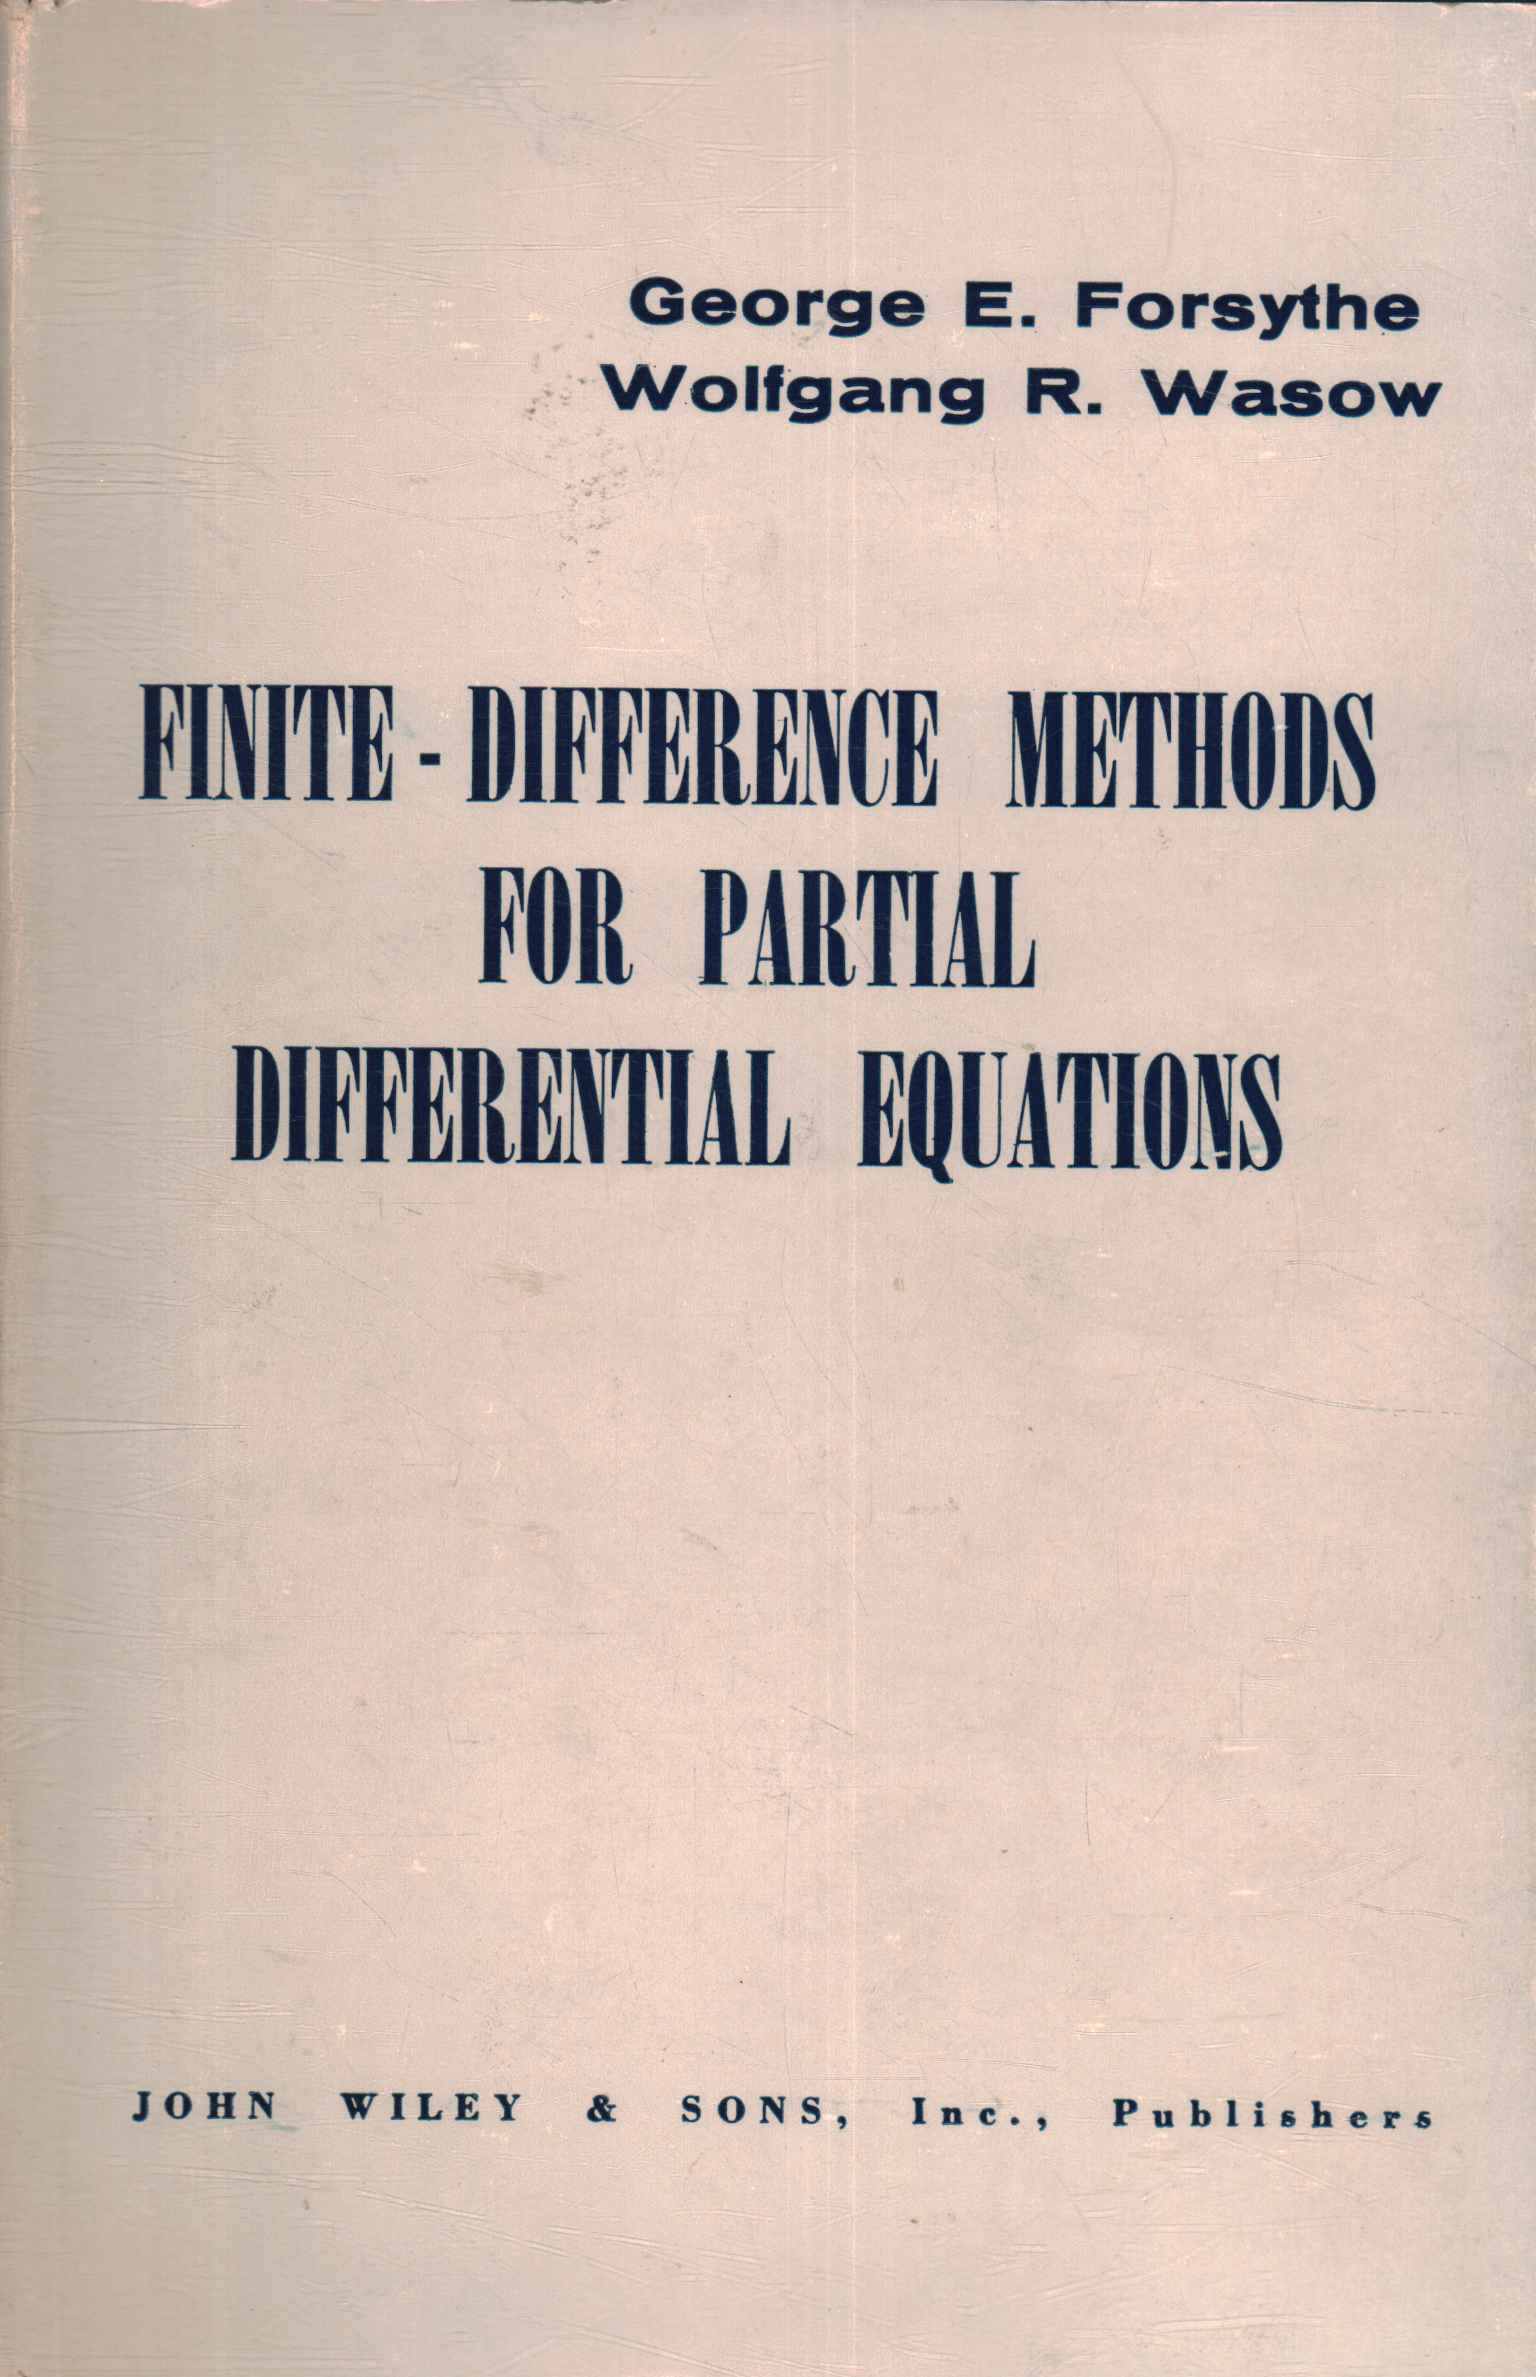 Finite-difference methods for patrial diff